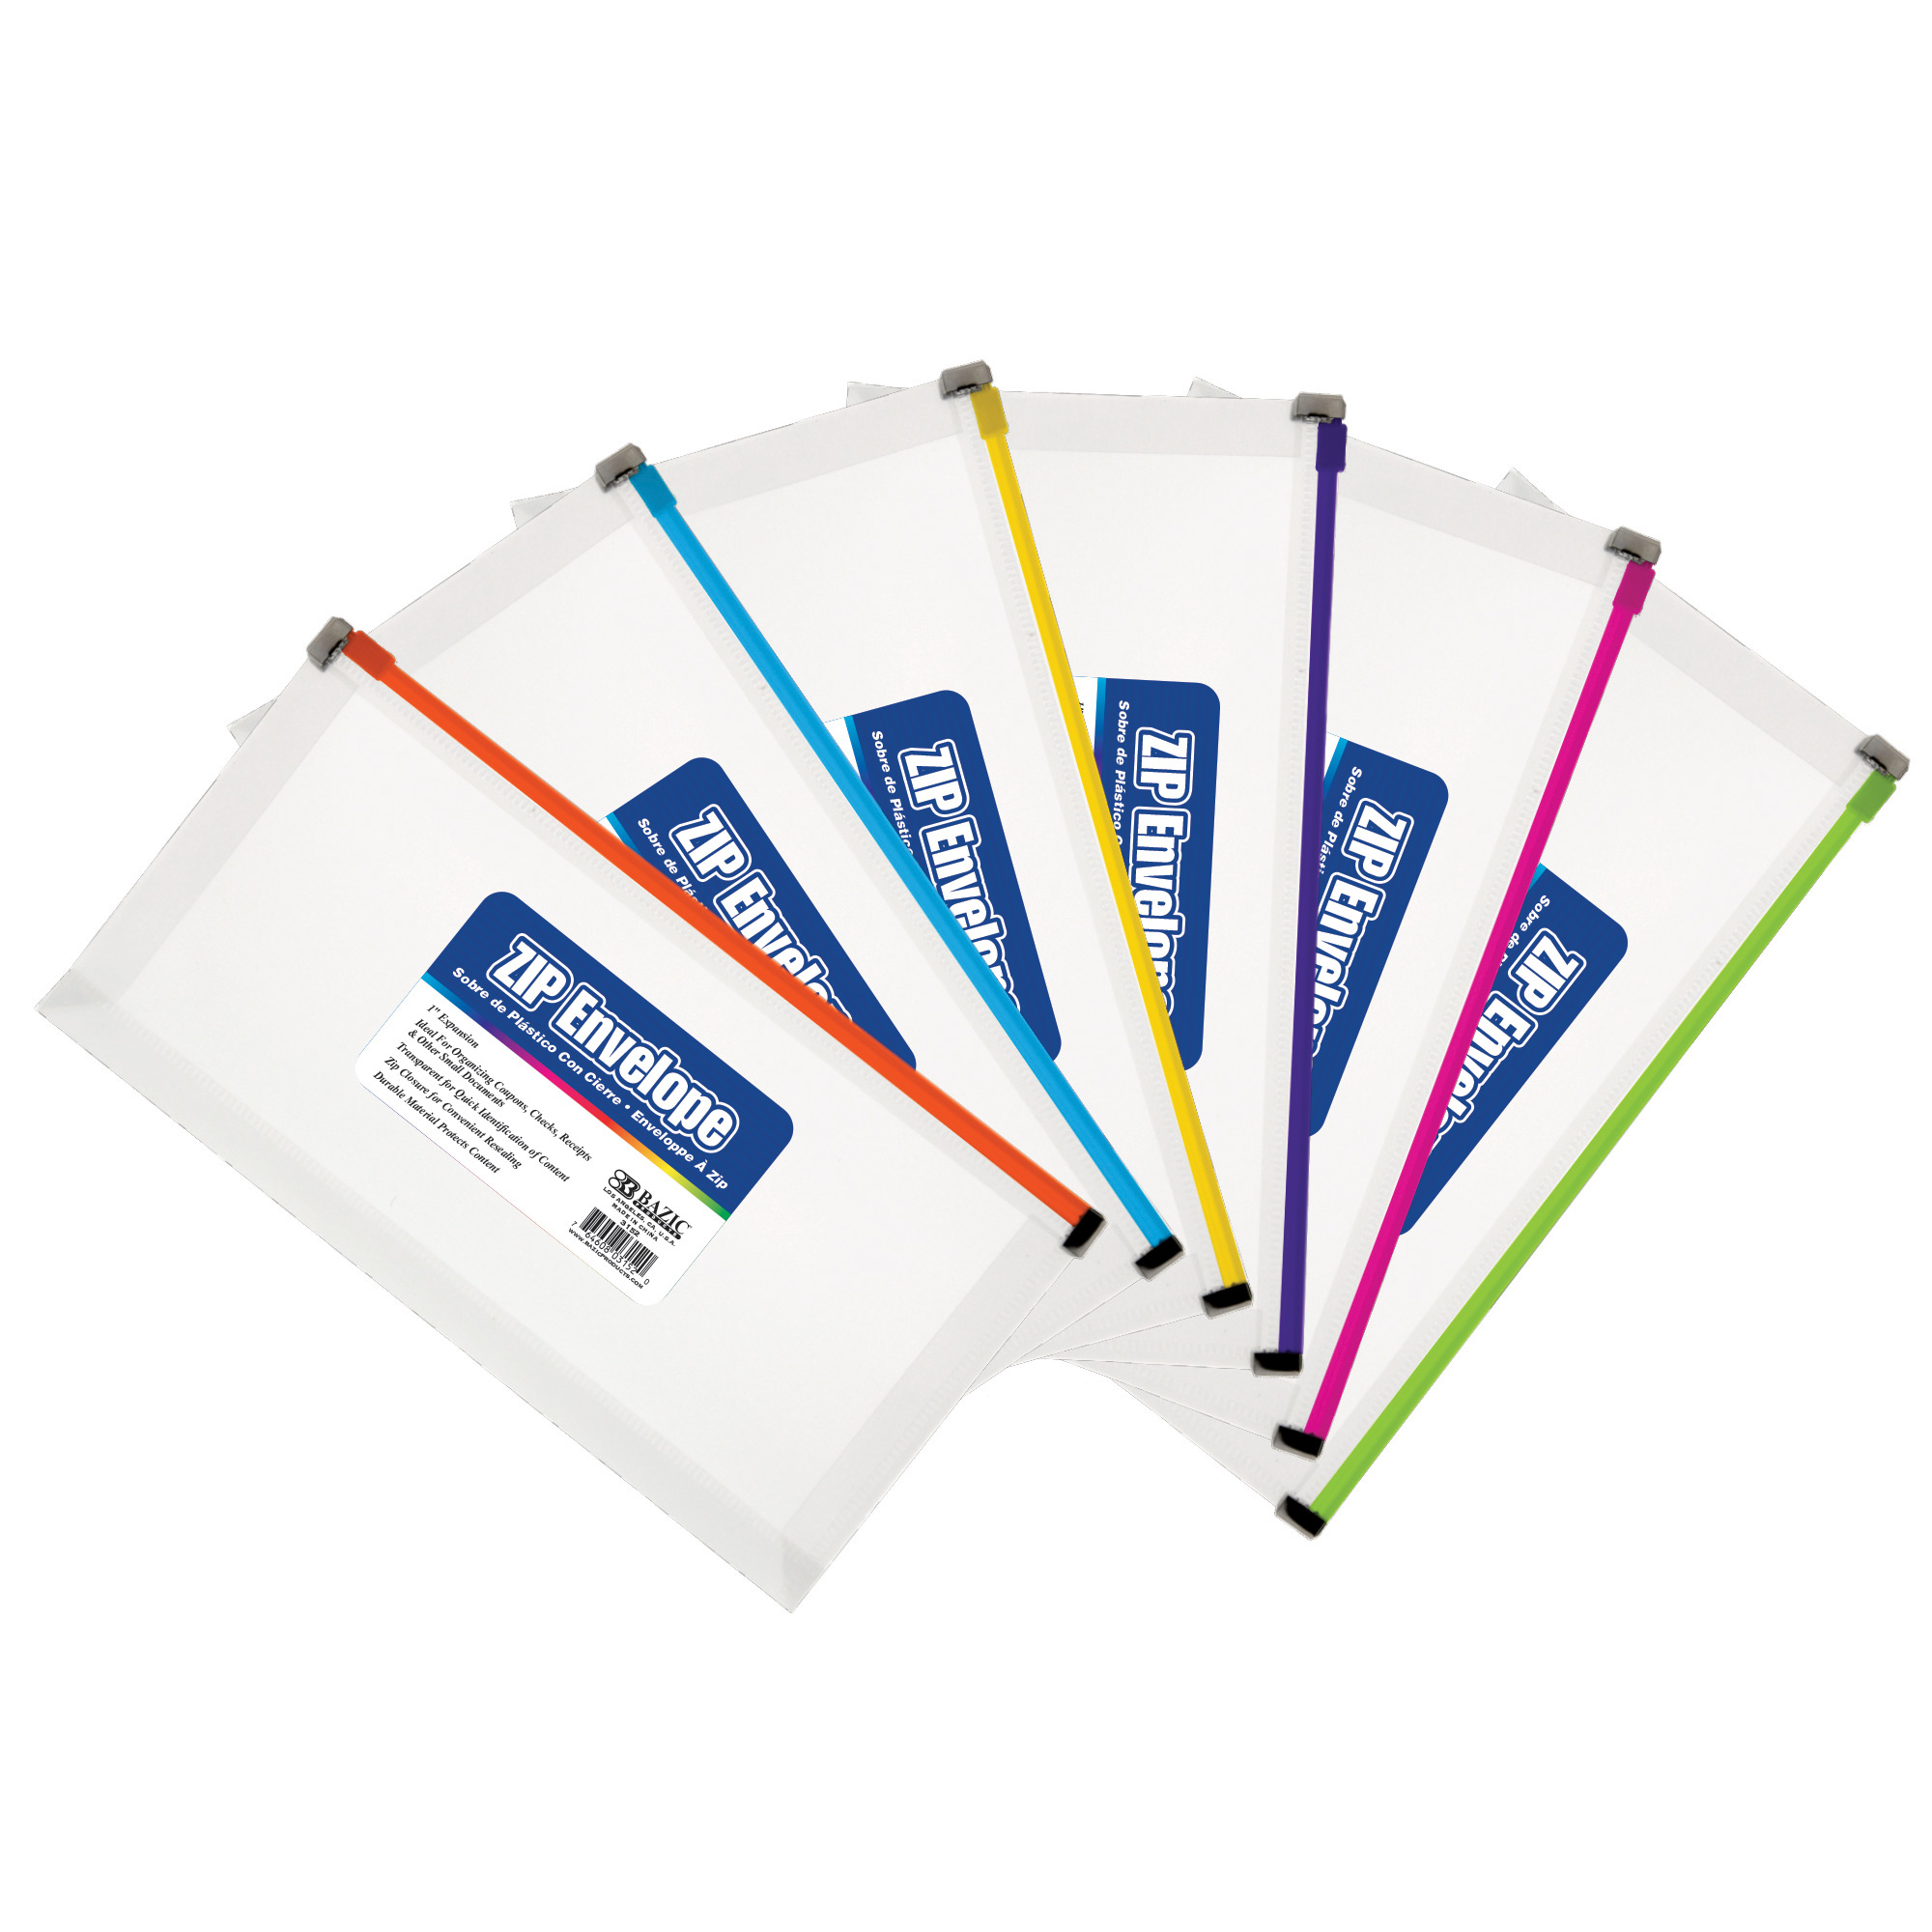 bazic-clear-coupon-check-size-zip-envelope-bazic-products